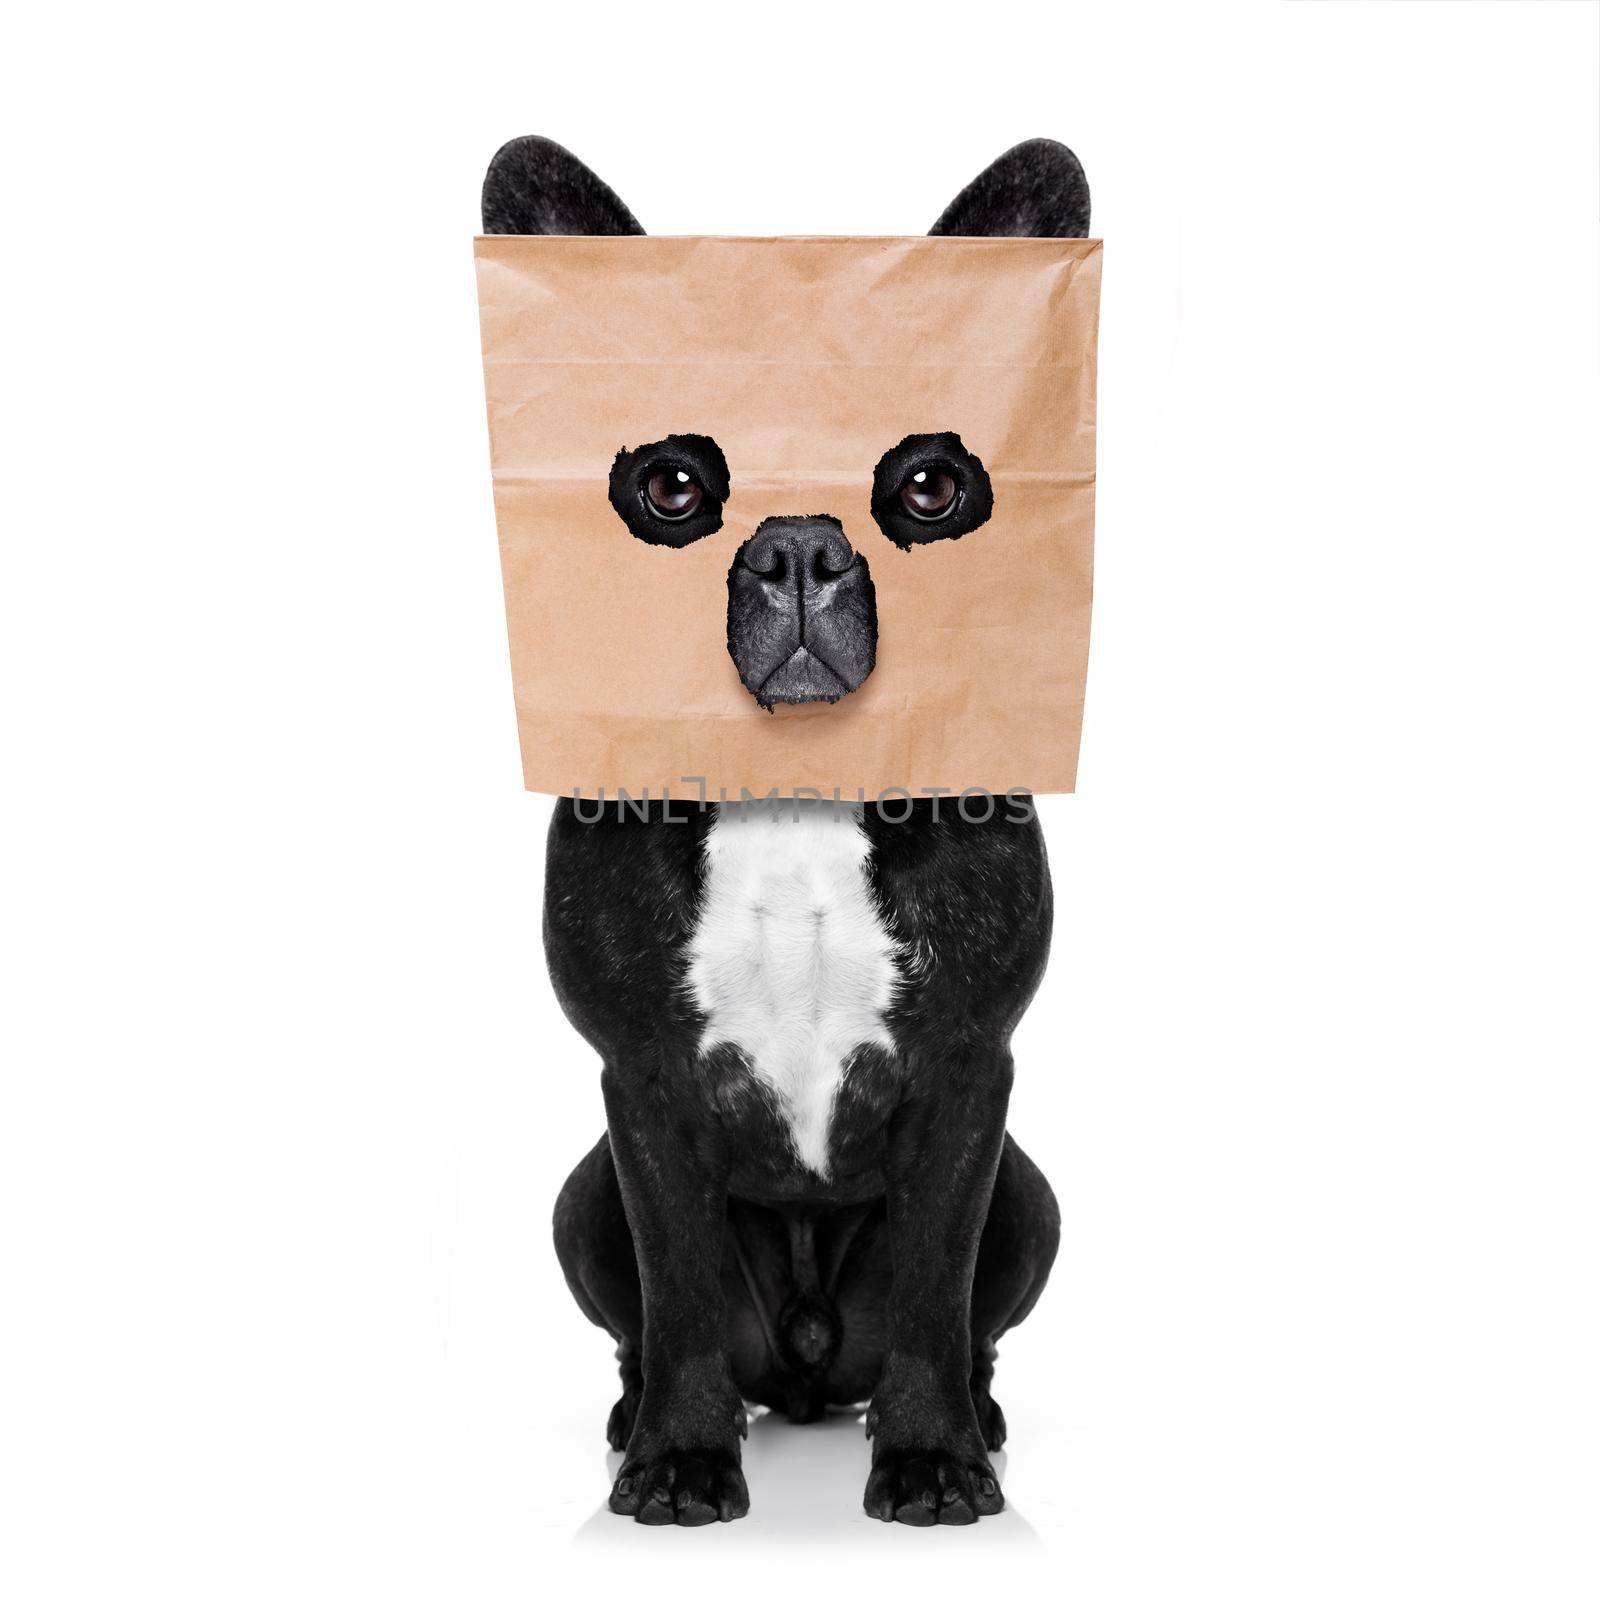 french bulldog dog  , hiding behind a paper bag on his head, isolated on white background